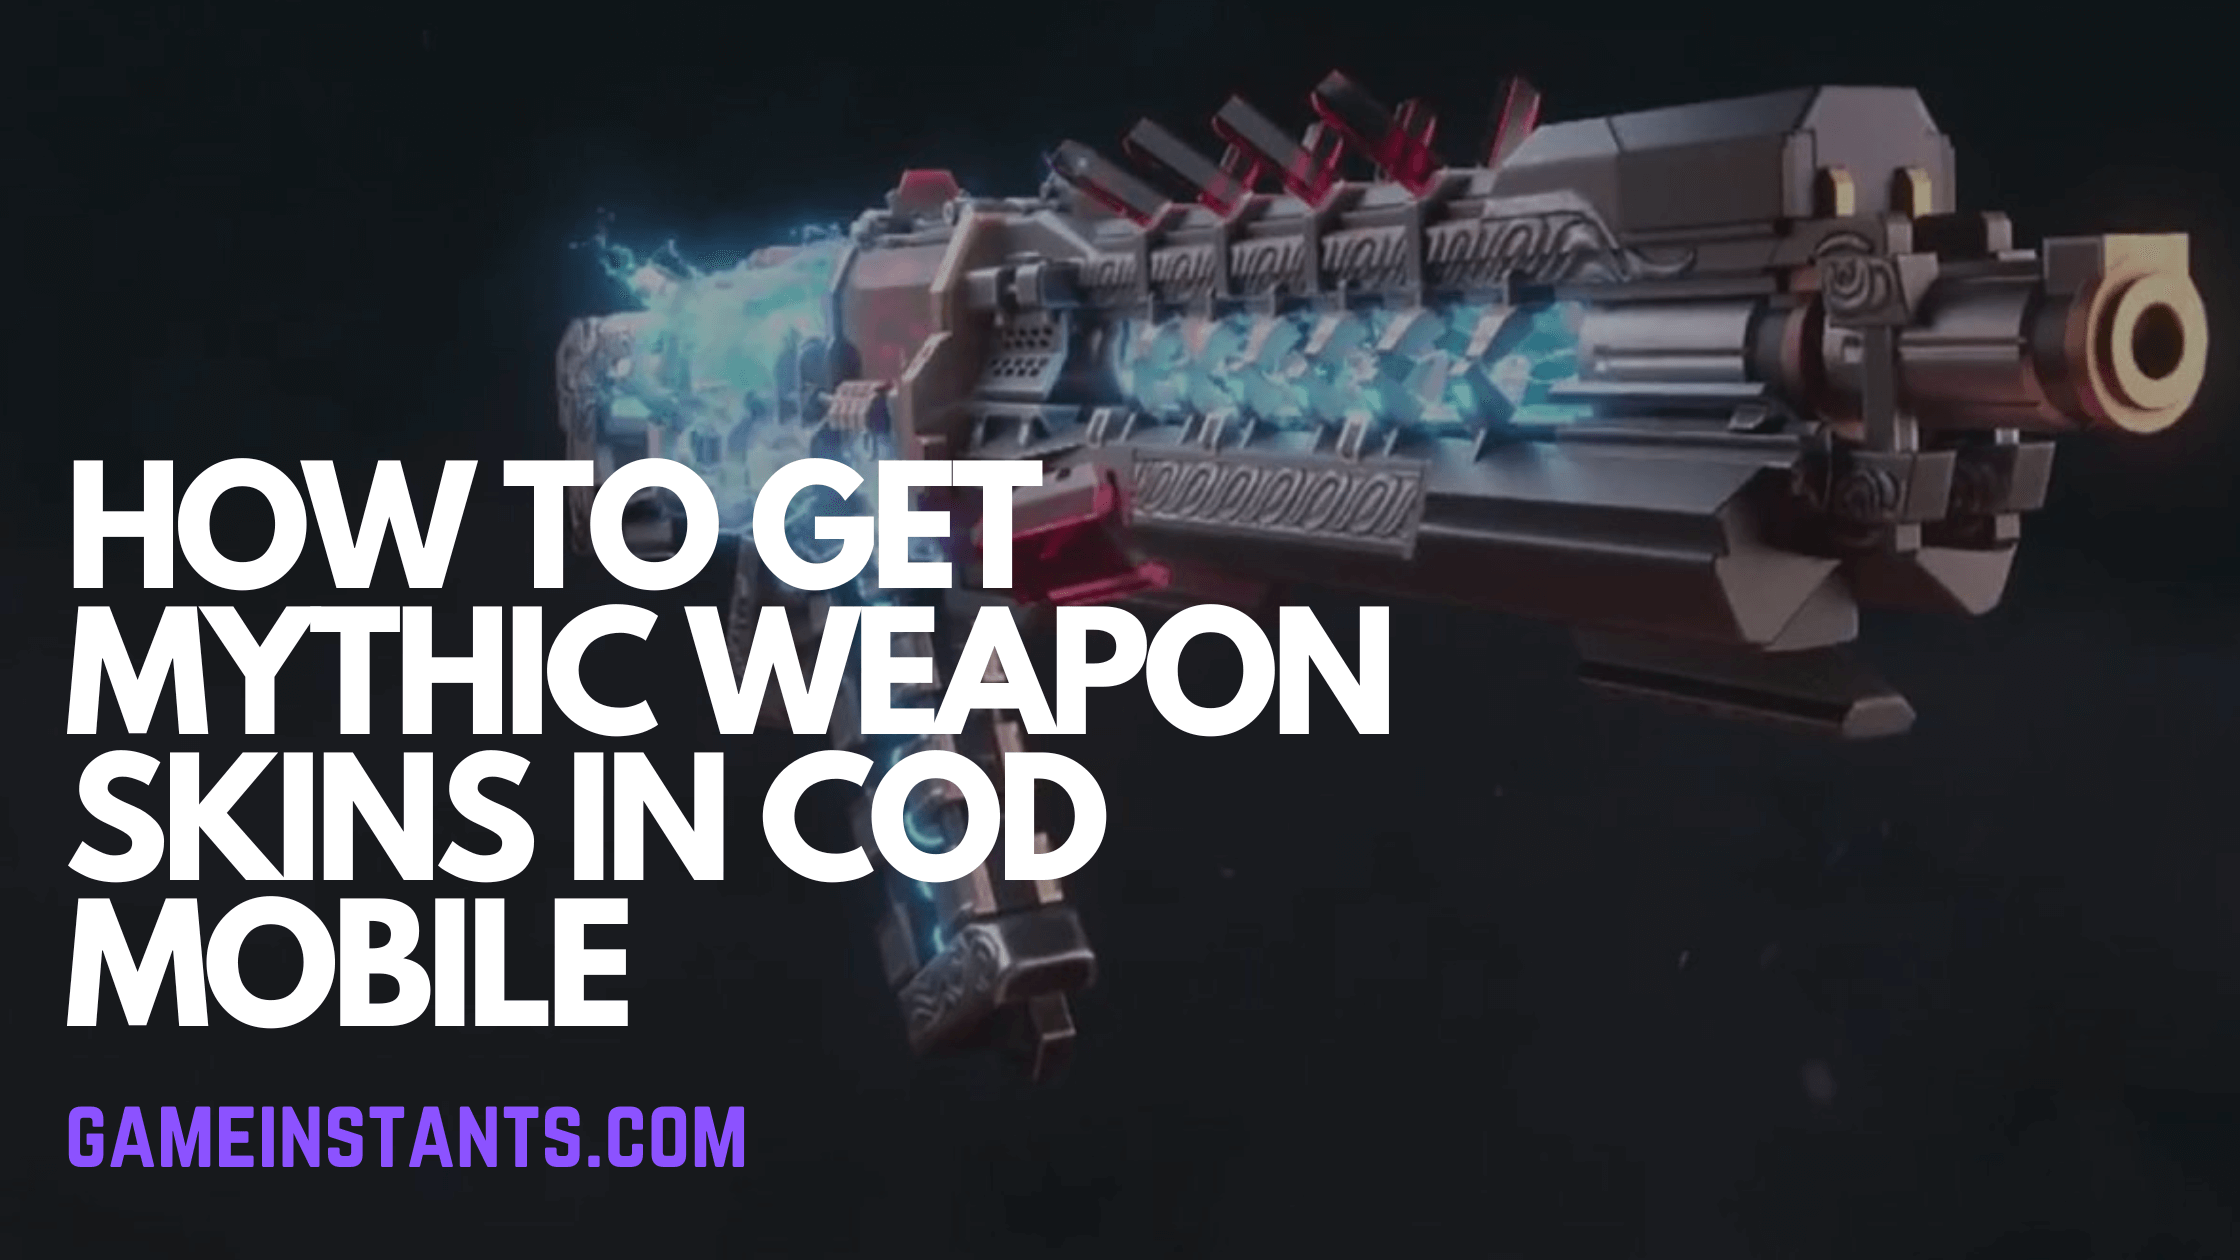 Mythic Weapon COD Mobile